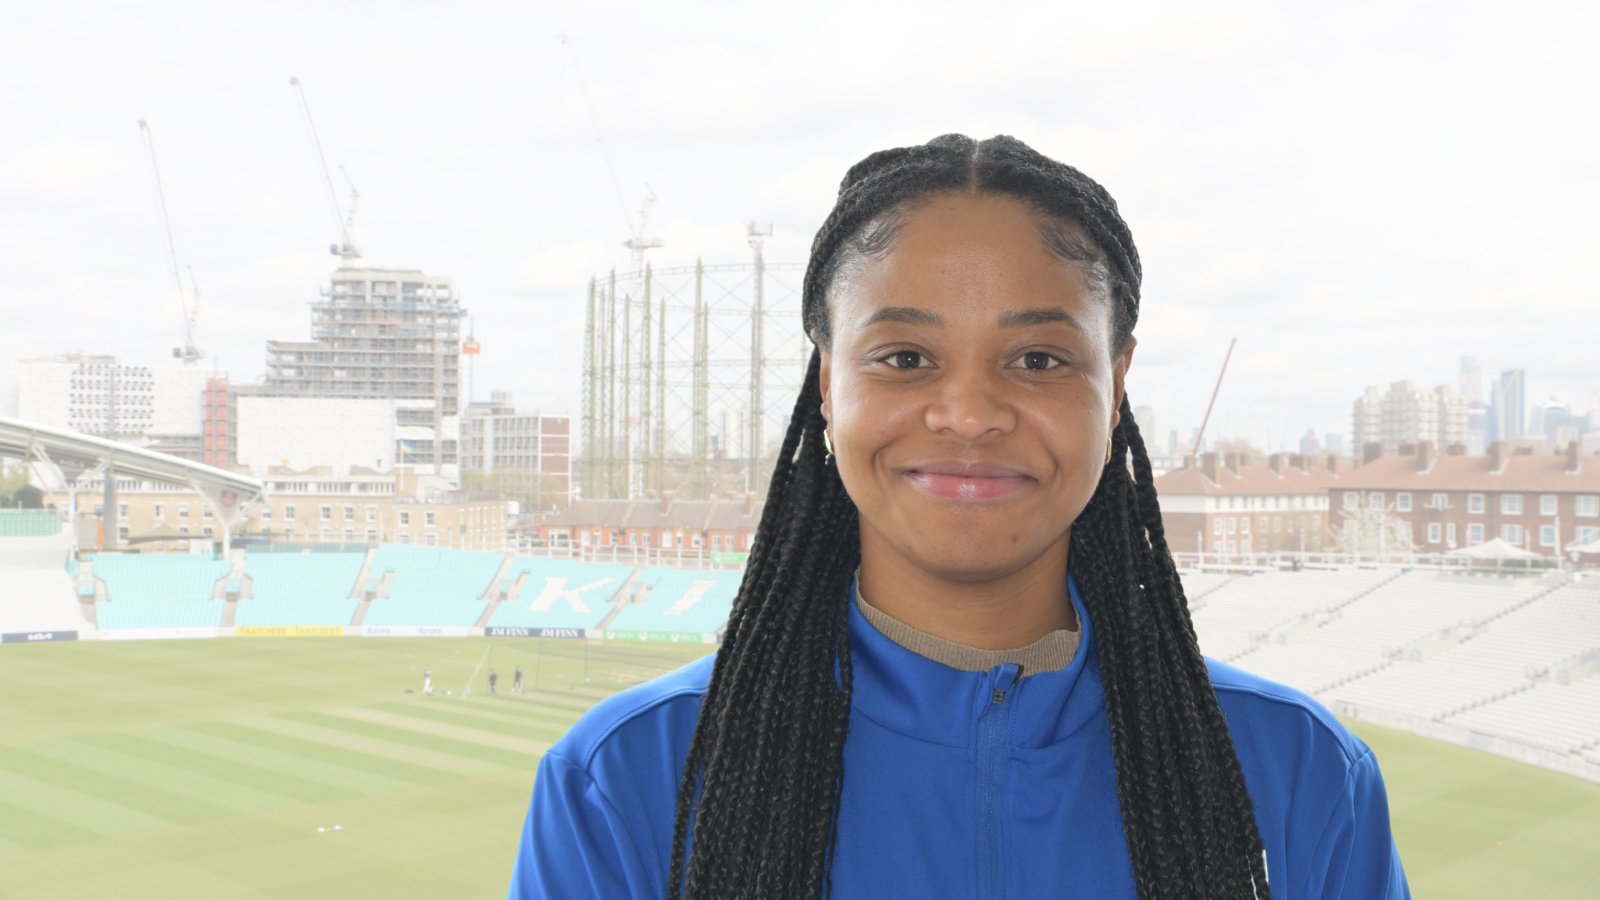 Meet our new Anti-Discrimination Officer, Tonika Campbell